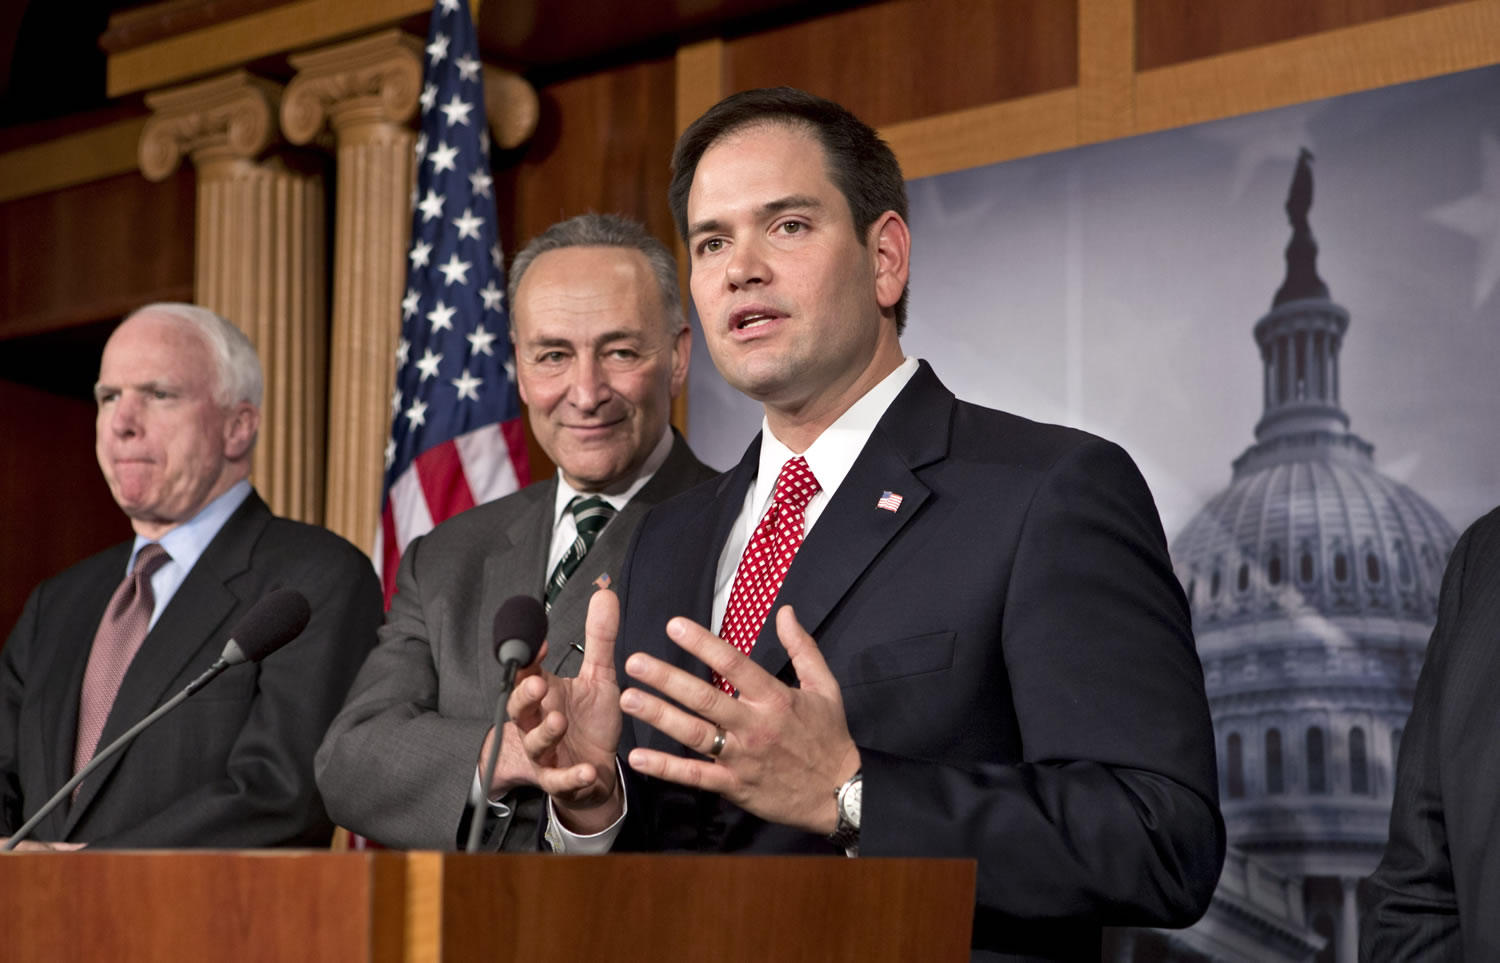 Sen. Marco Rubio, R-Fla., center, takes a reporter's question as a bipartisan group of leading senators announce that they have reached agreement on the principles of sweeping legislation to rewrite the nation's immigration laws during a news conference at the Capitol in Washington on Monday. From left are Sen. John McCain, R-Ariz., and Sen. Charles Schumer, D-N.Y.